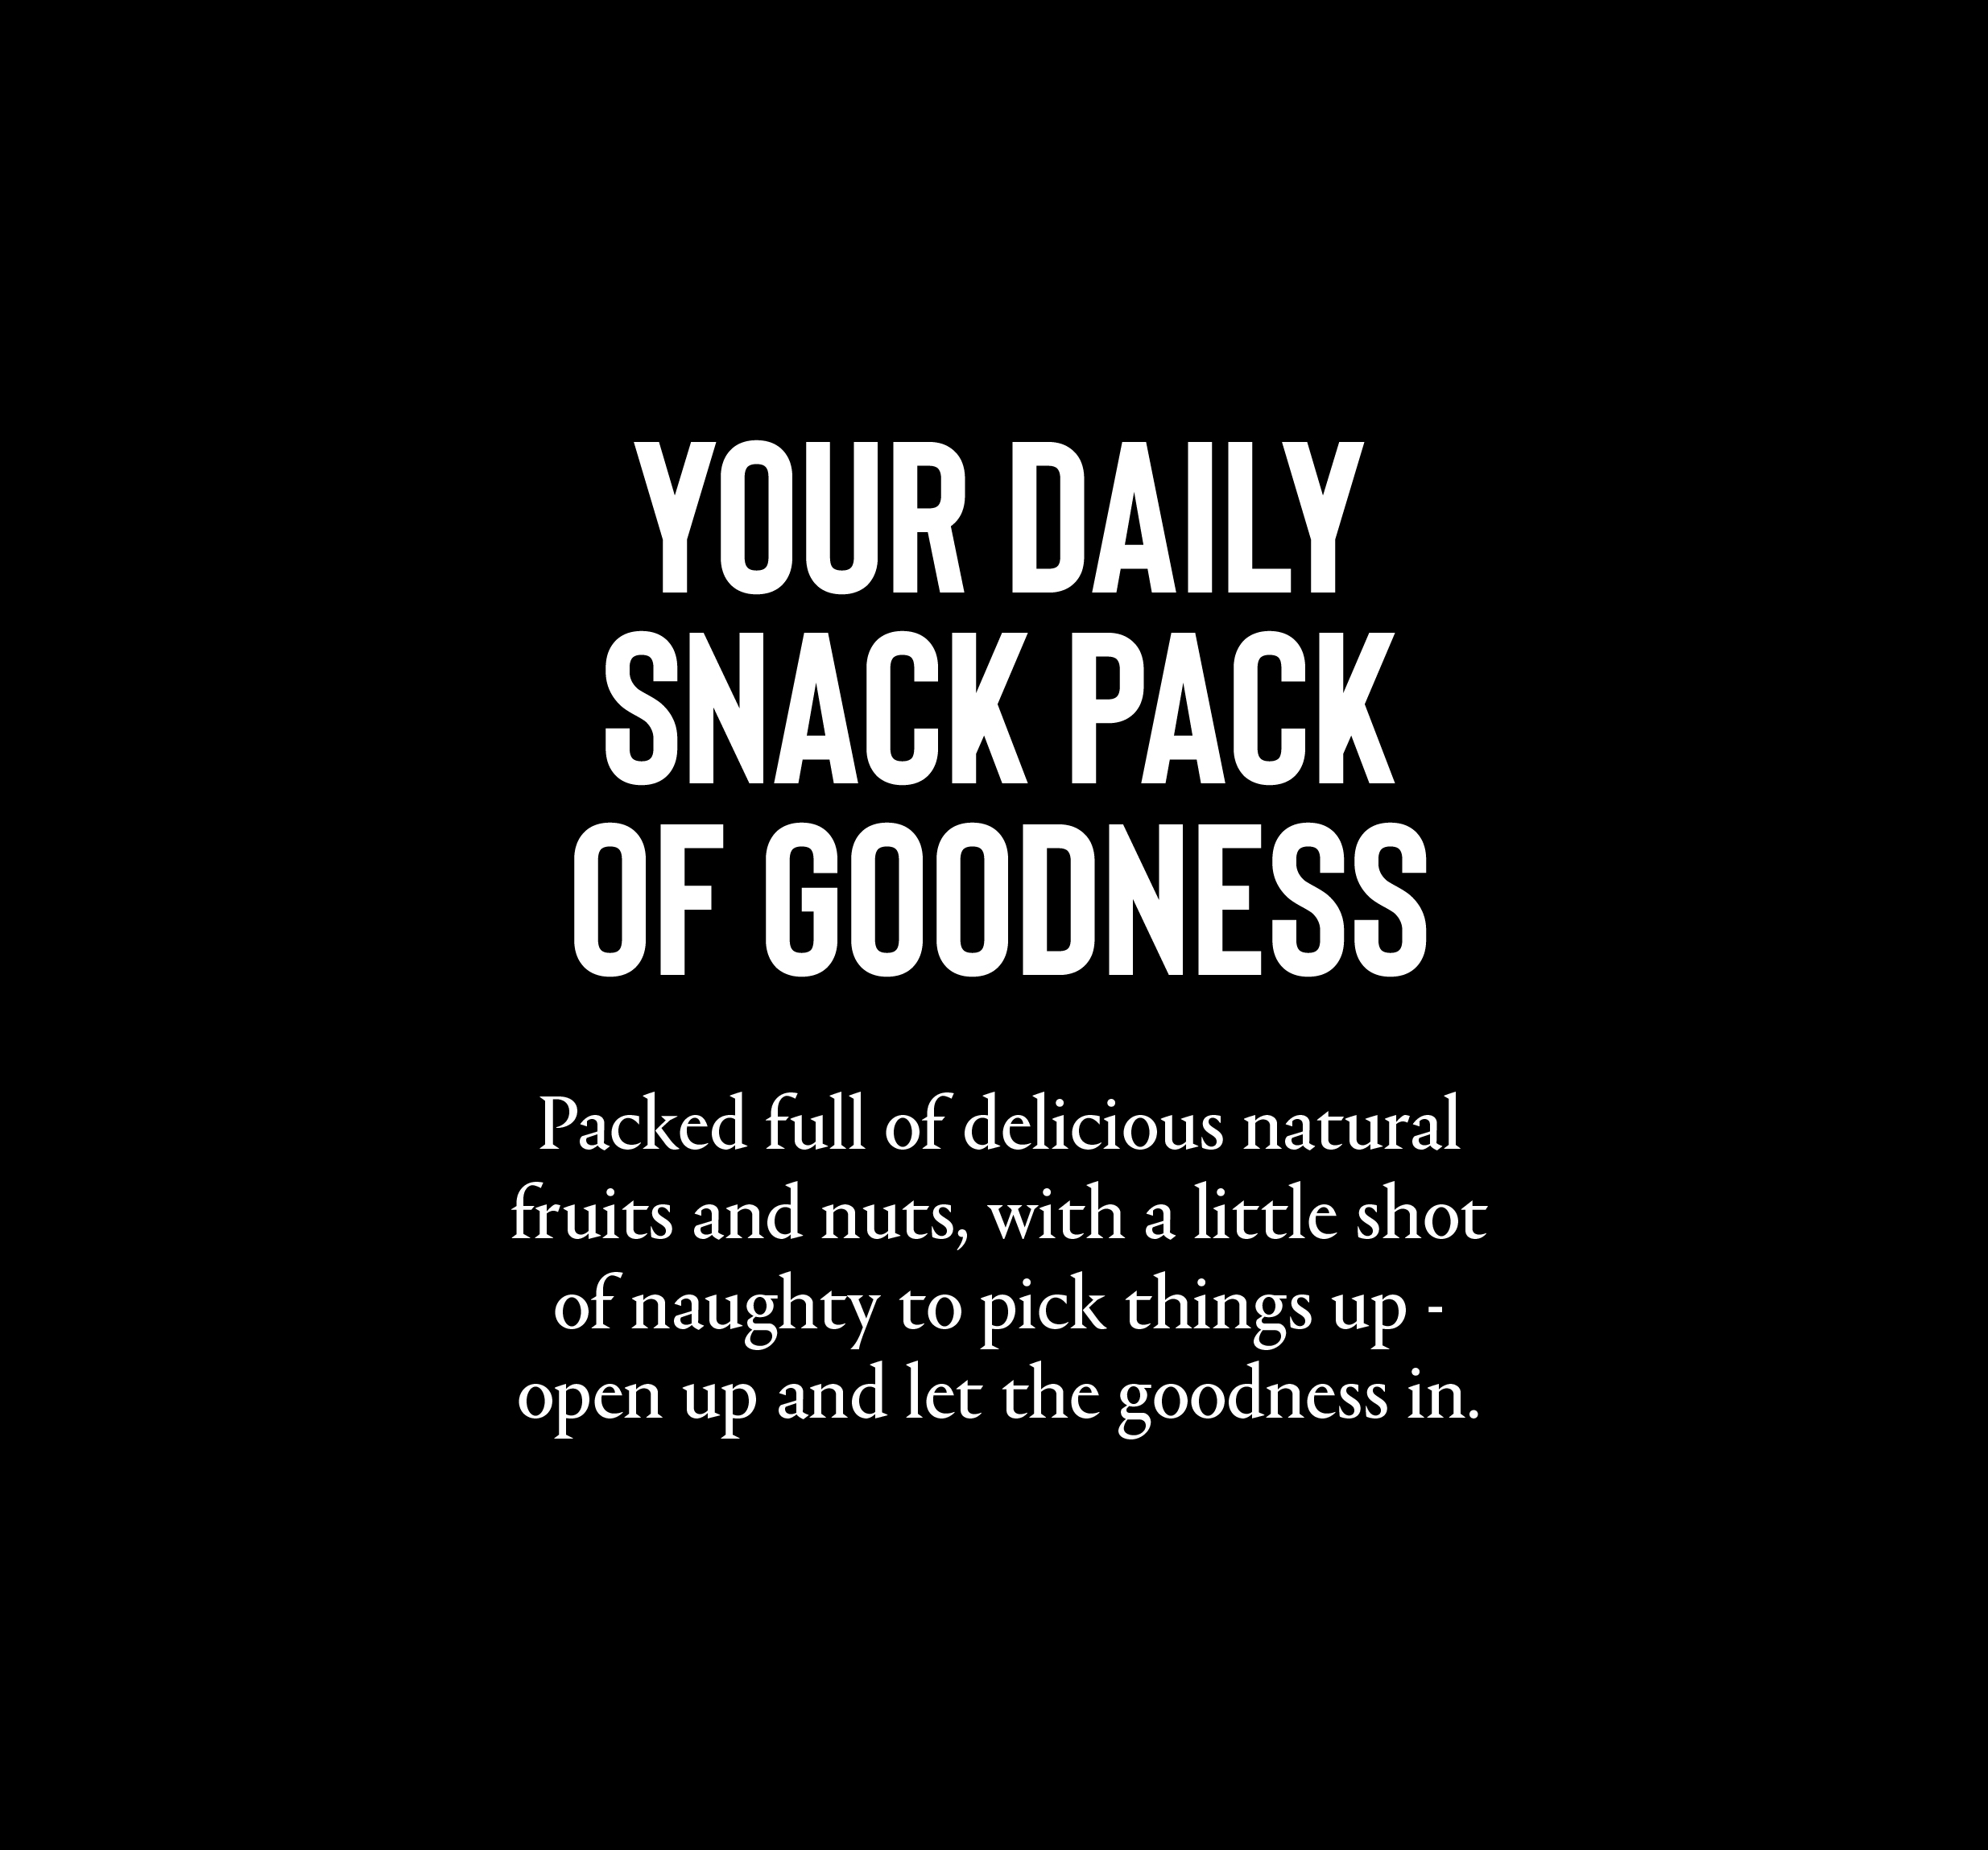 your daily snack pack spiel on black background